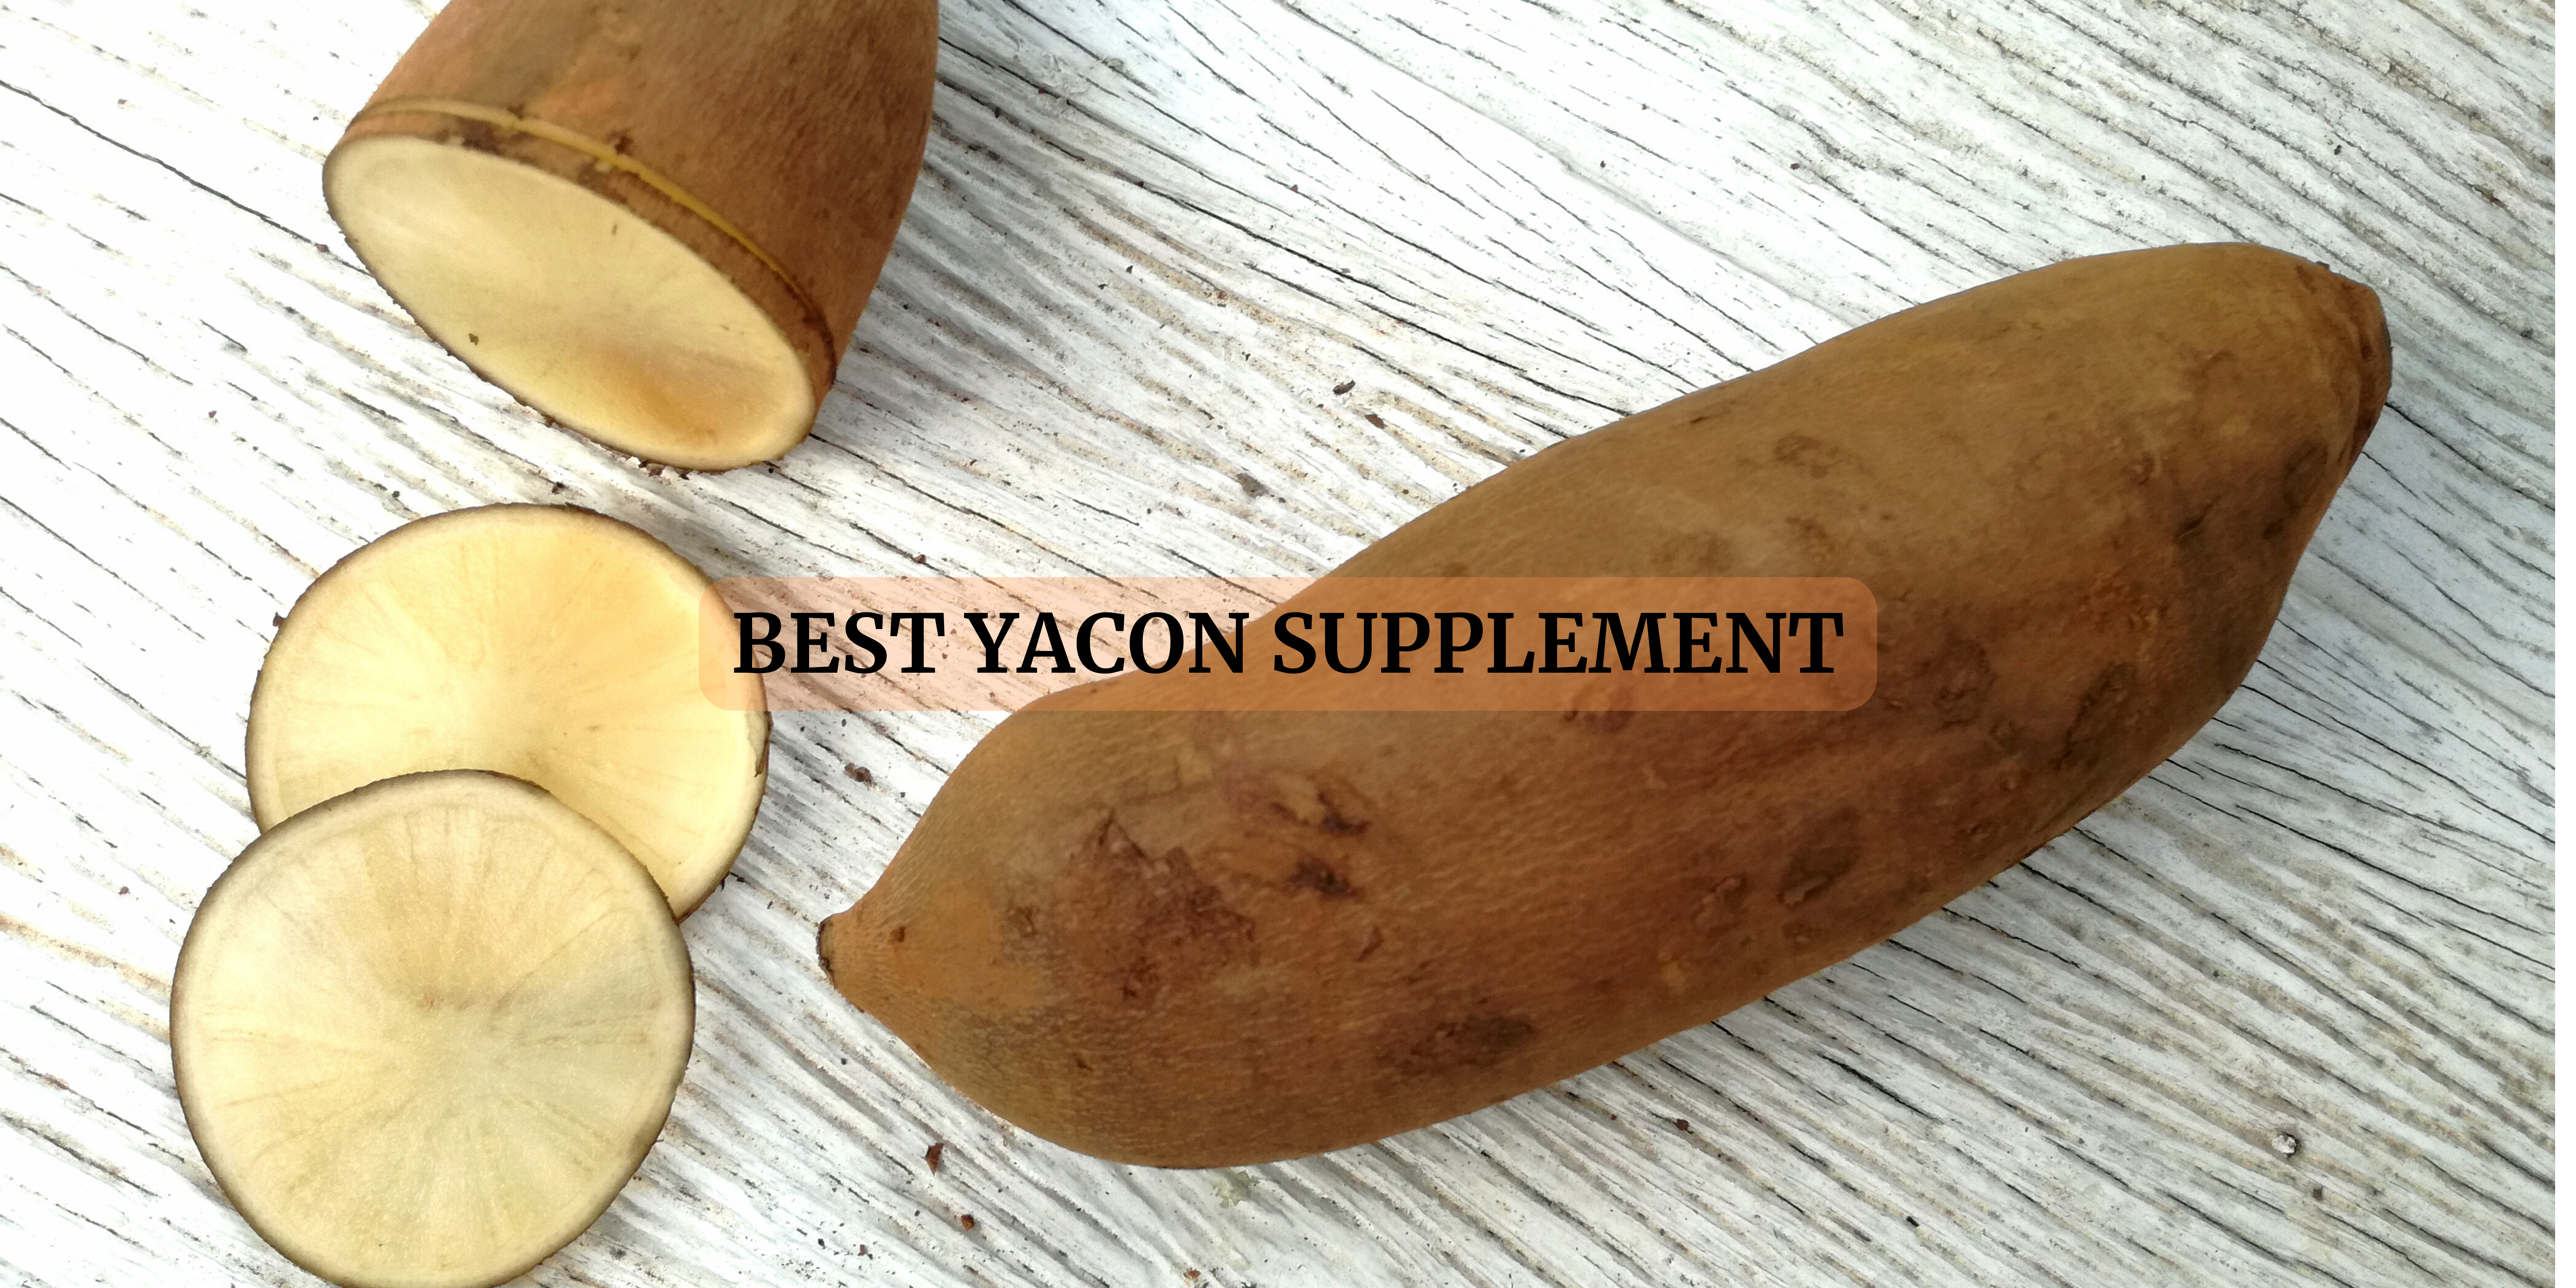 Yacon Supplements in India